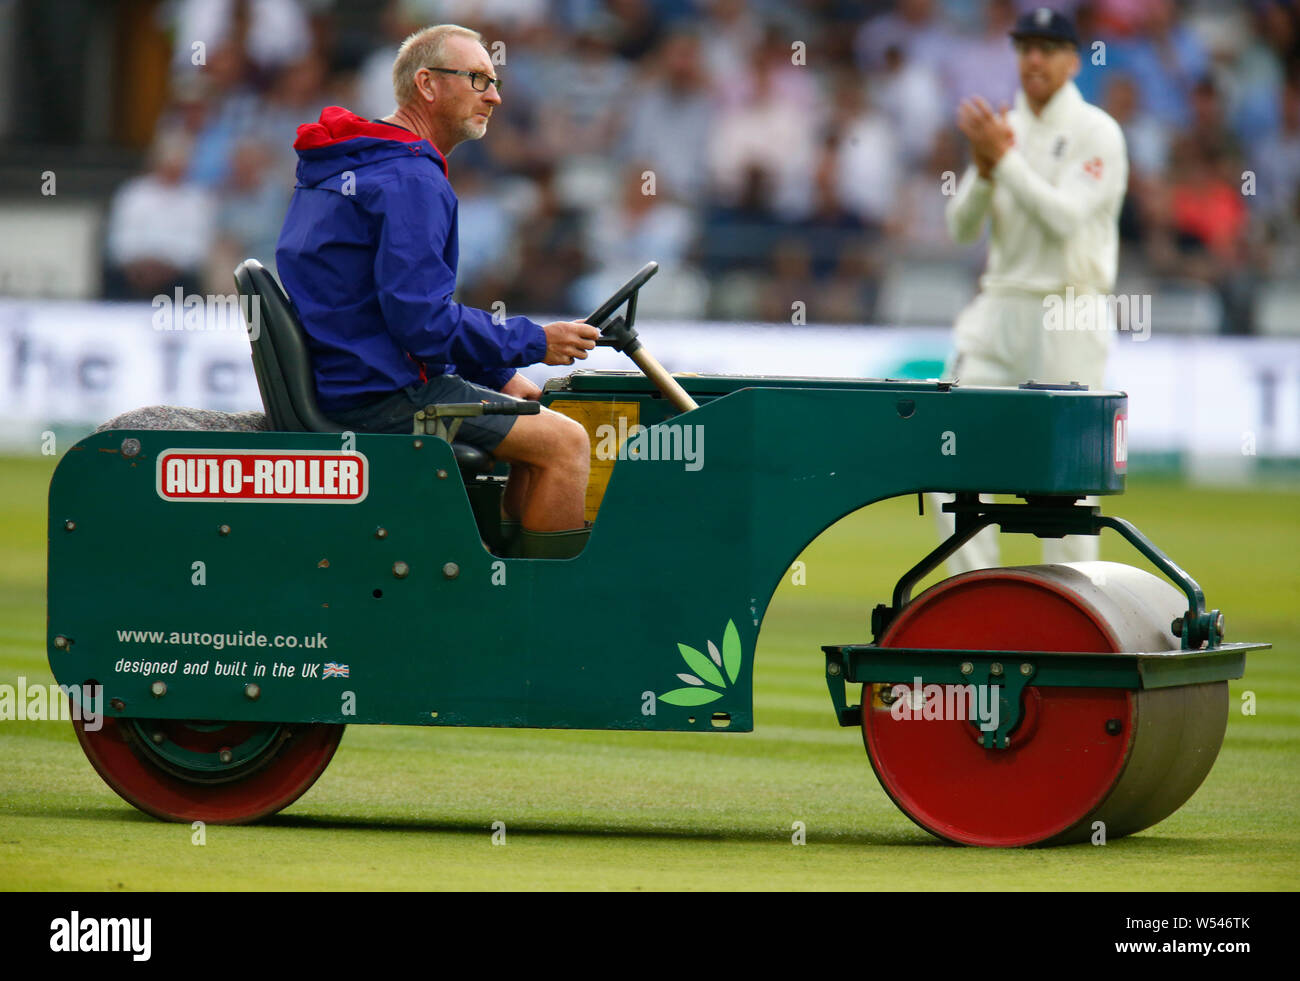 London, UK. 26th July, 2019. LONDON, ENGLAND. JULY 26: Roller during International Test Match Series Day 3 between England and Ireland at the Lord's Cricket Ground on July 26, 2019 in London, England. Credit: Action Foto Sport/Alamy Live News Stock Photo